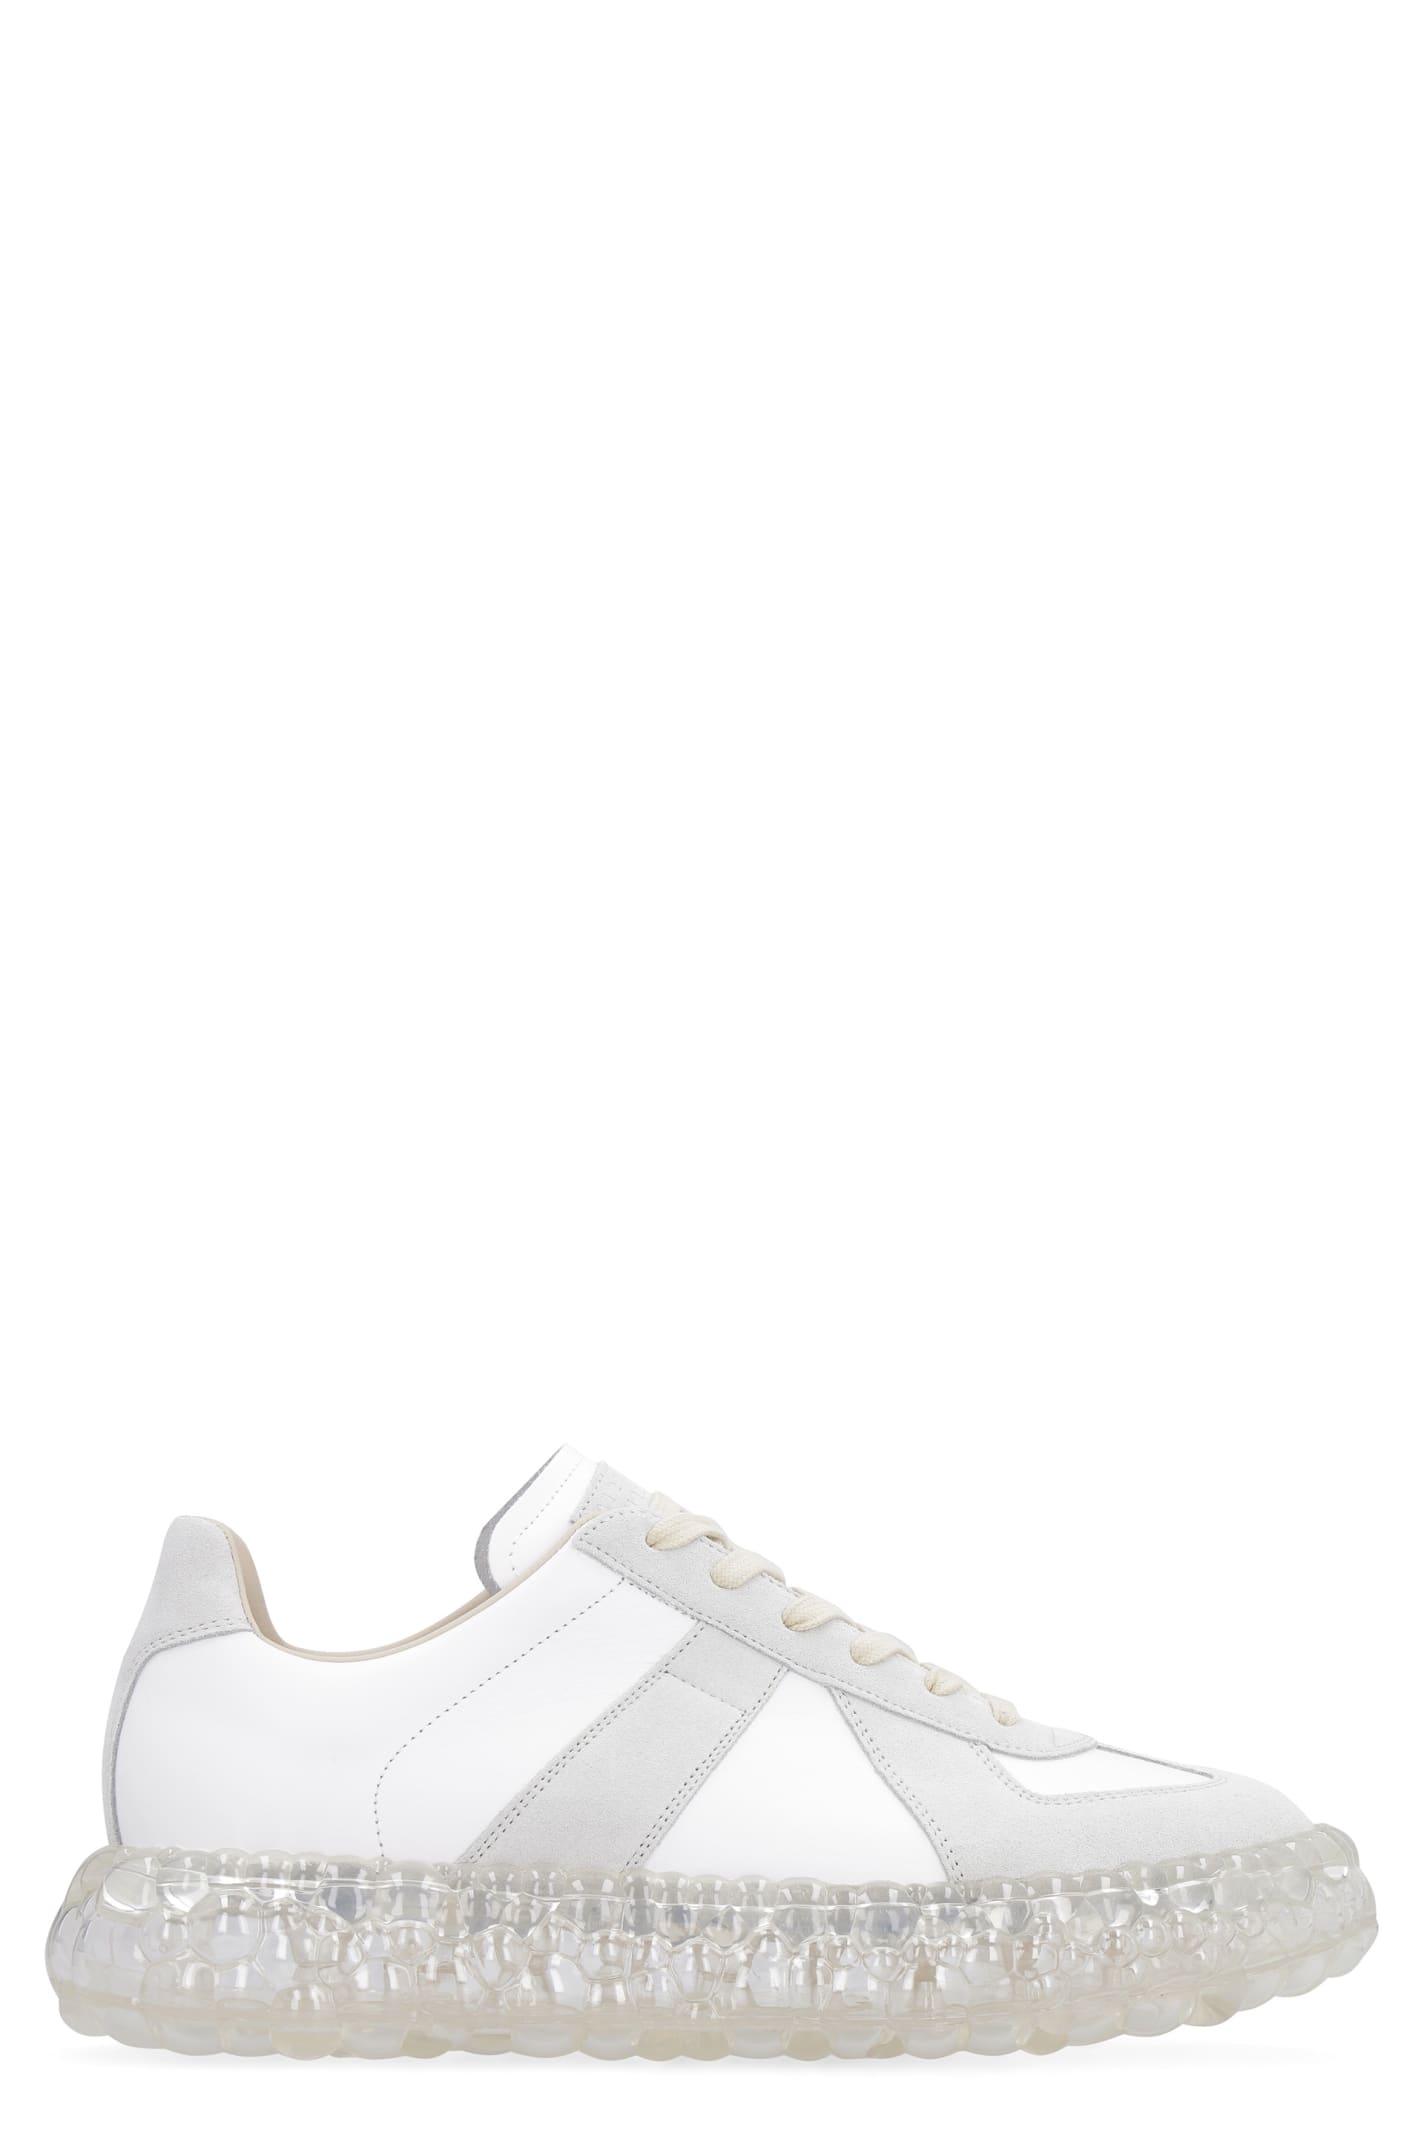 MAISON MARGIELA REPLICA LEATHER LOW-TOP SNEAKERS,S37WS0503P1895 101